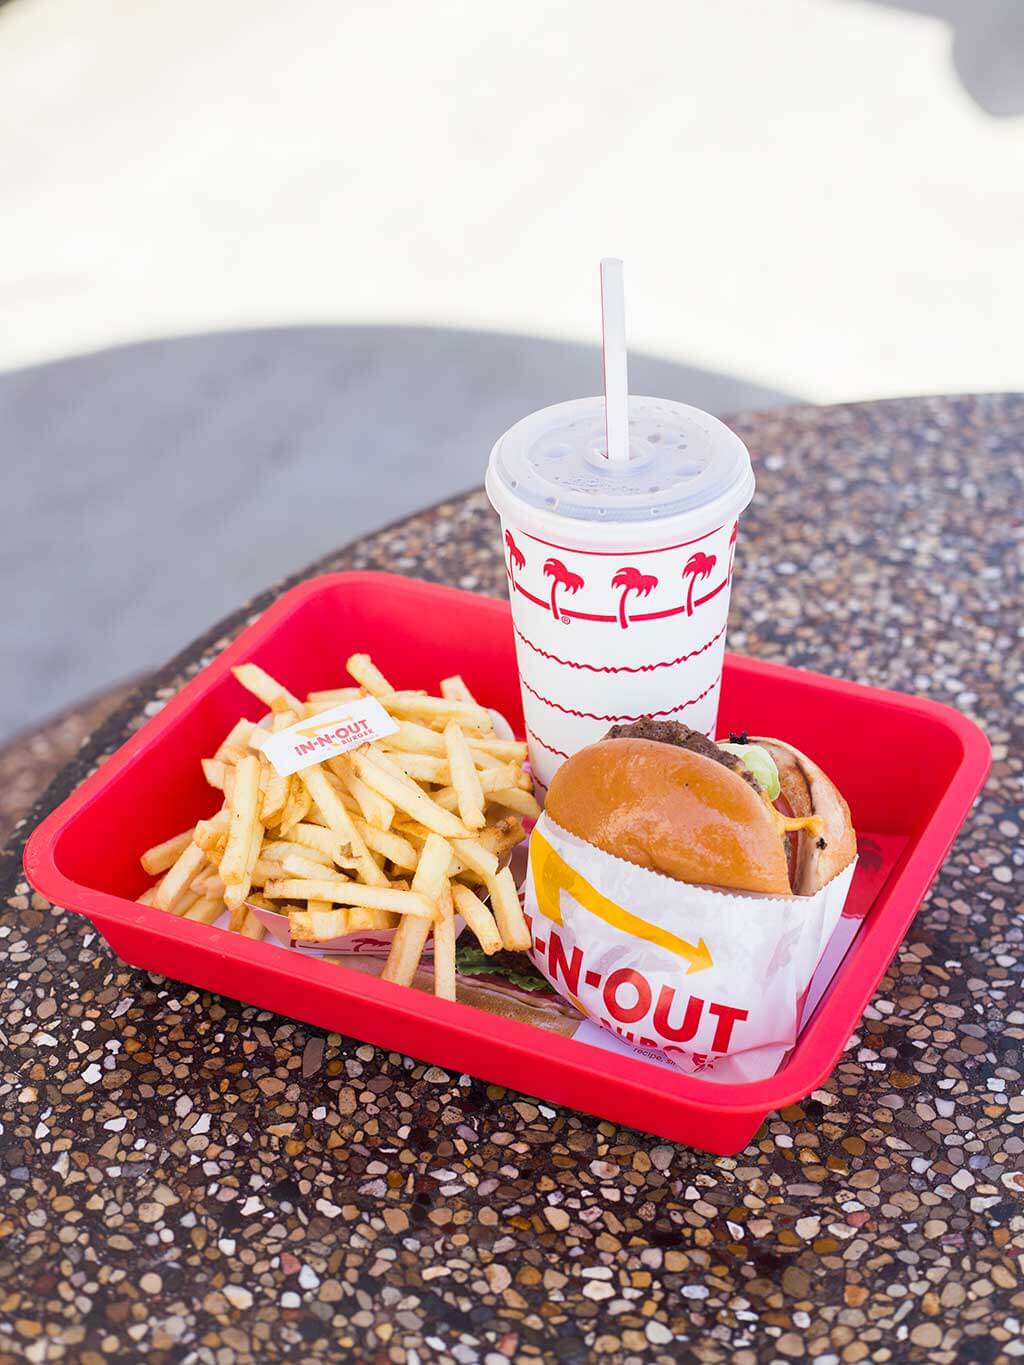 drive-swim-fly-in-n-out-burger-gilroy-california-cheeseburgers-fast-food-west-coast-original-burger-meal-french-fries-soft-drink-soda